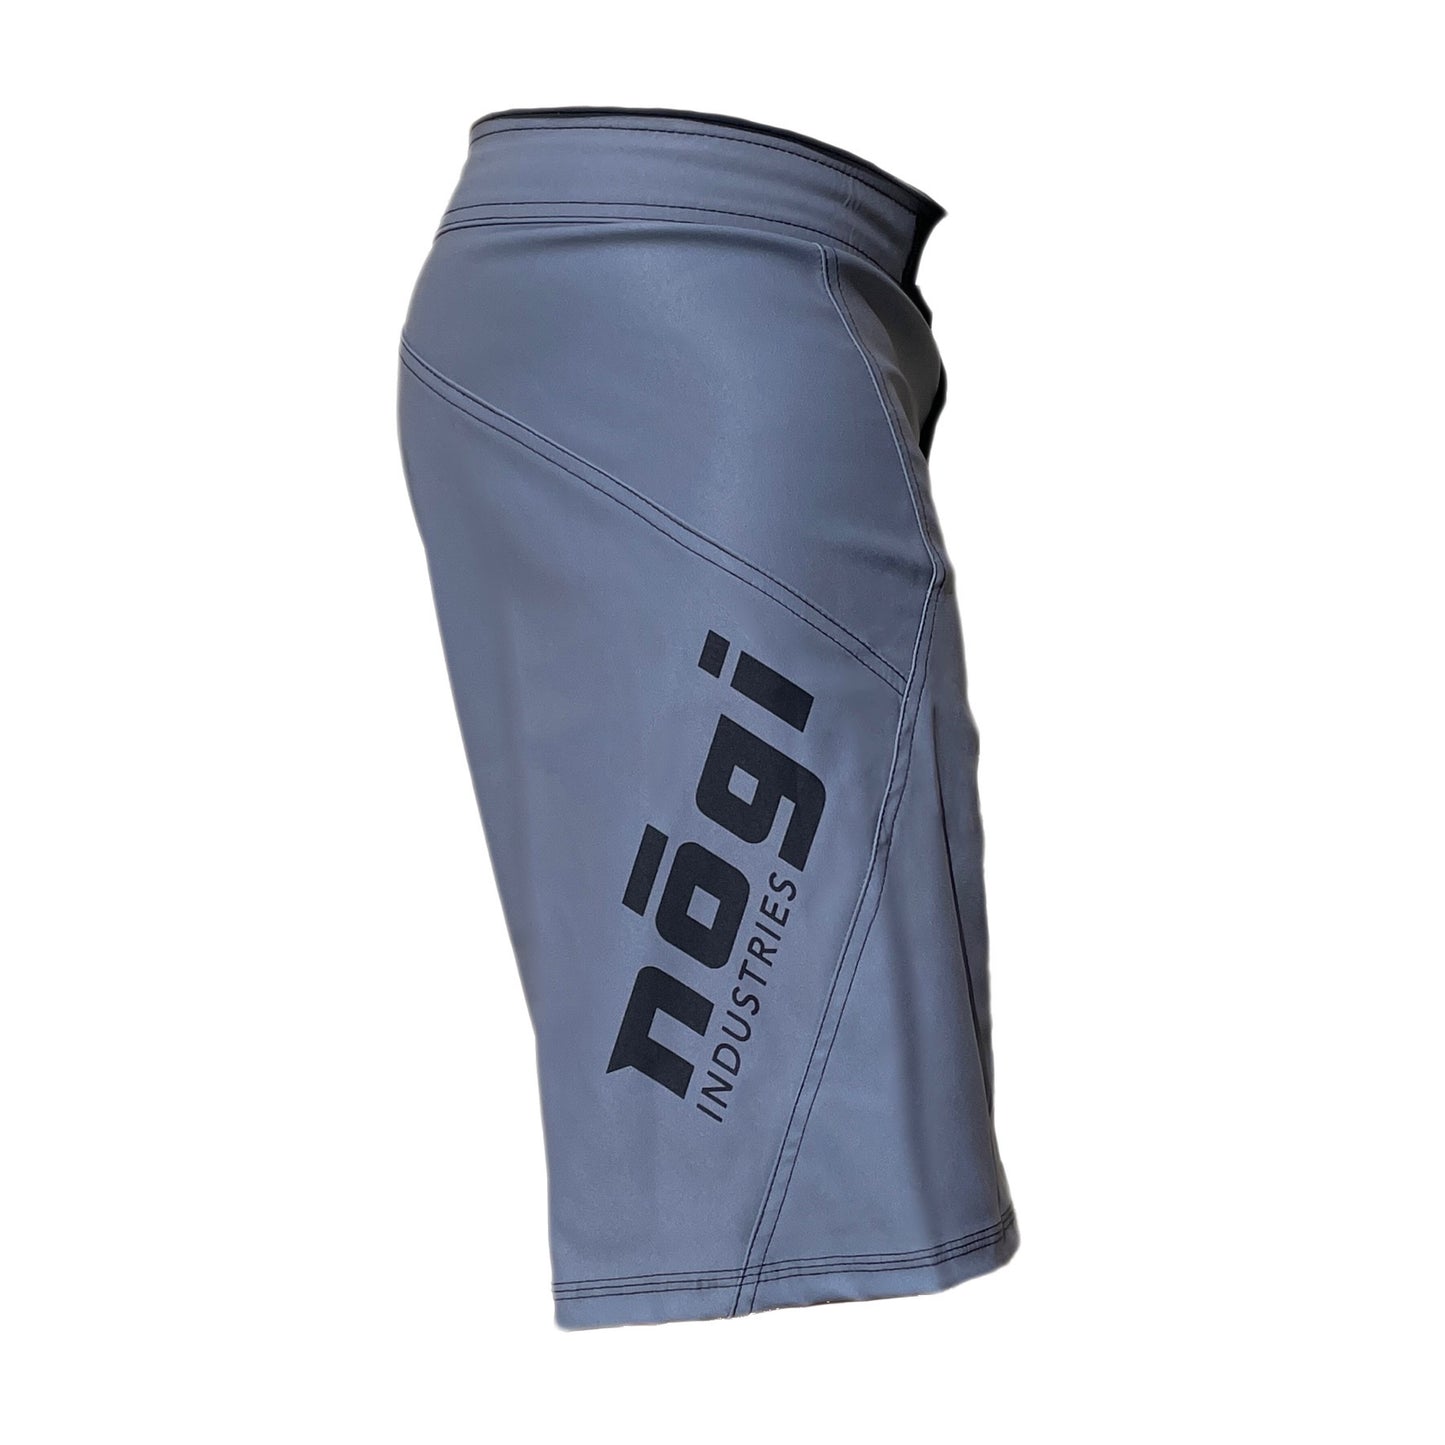 4.0 Fight Shorts - Classic Gray by Nogi Industries - MADE IN USA